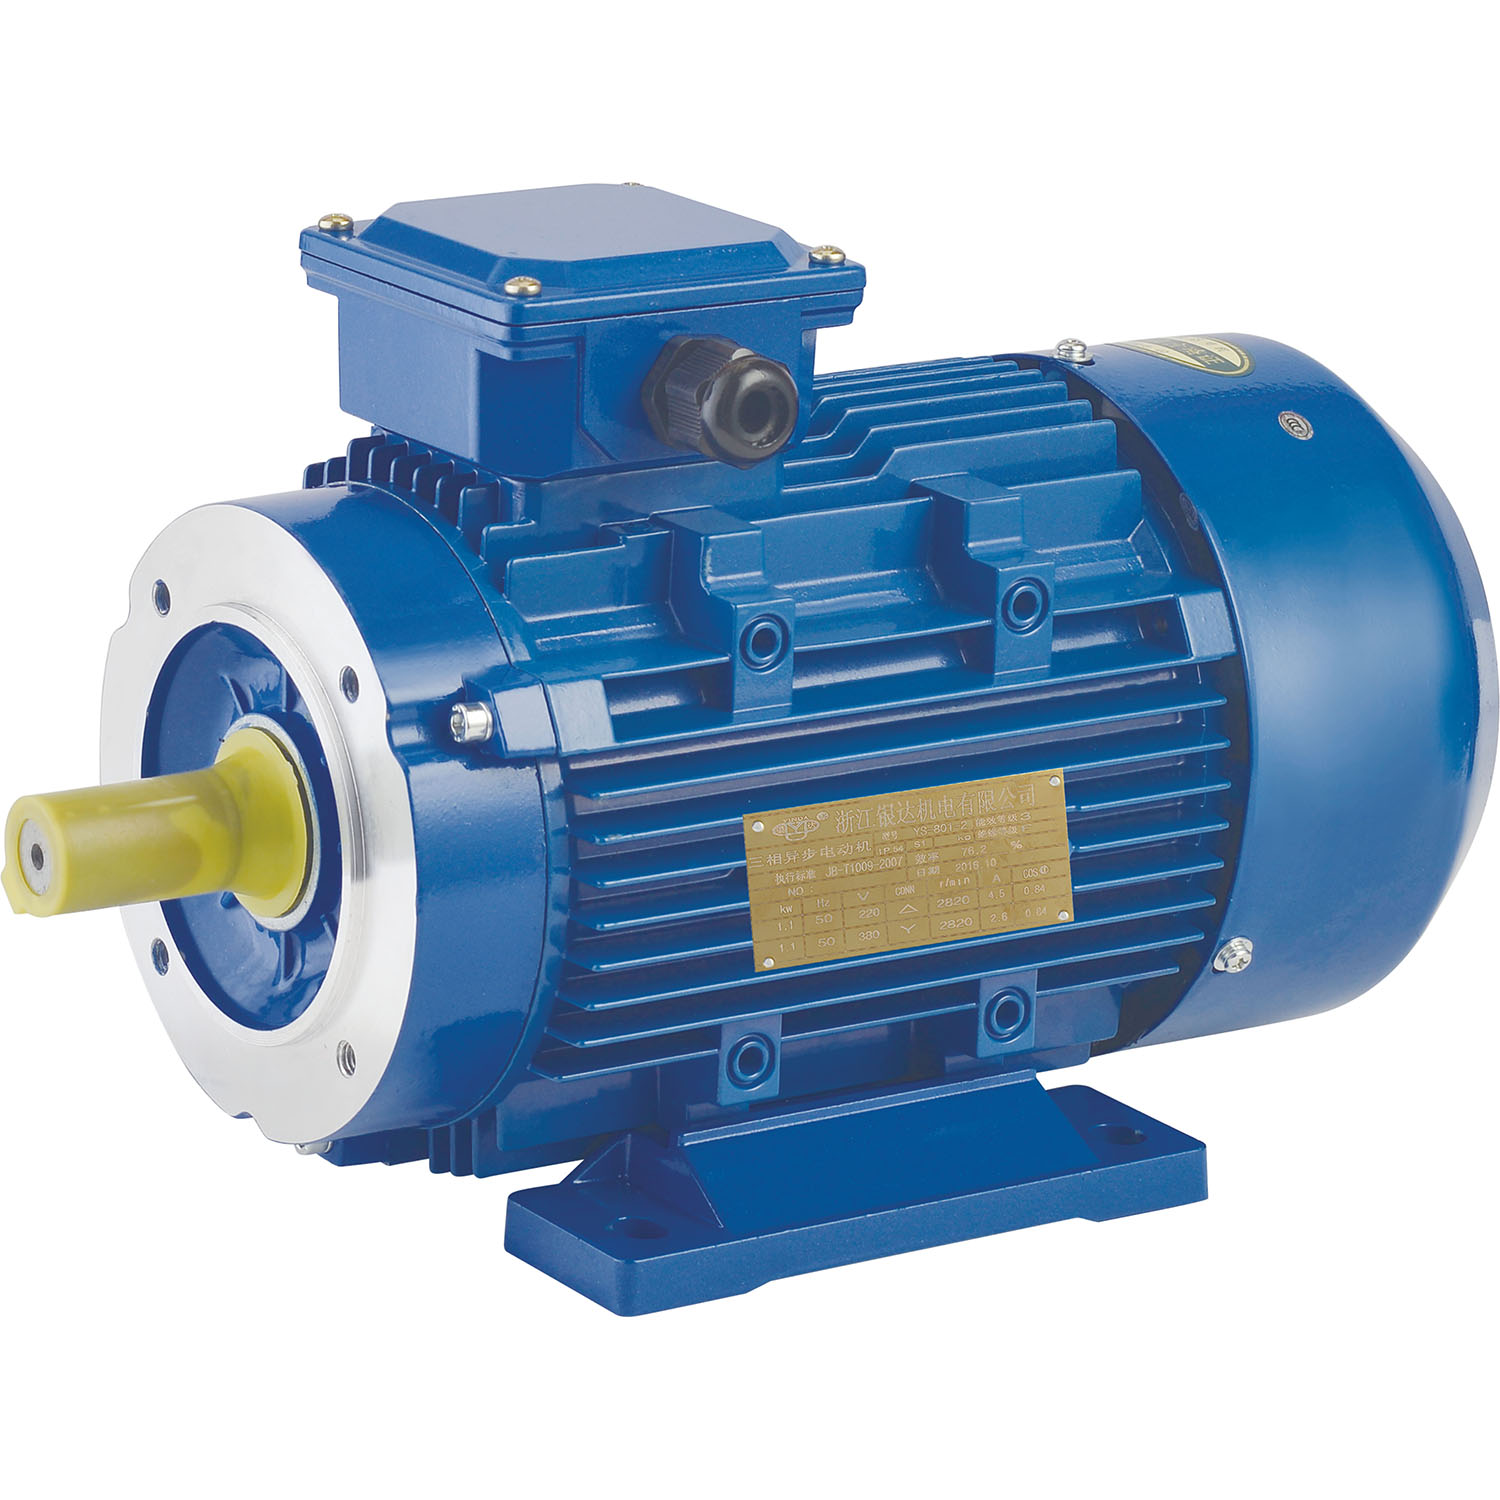 YX3-132M2-6 5.5KW 7.5HP aluminum cylinder series high efficiency three-phase asynchronous motor